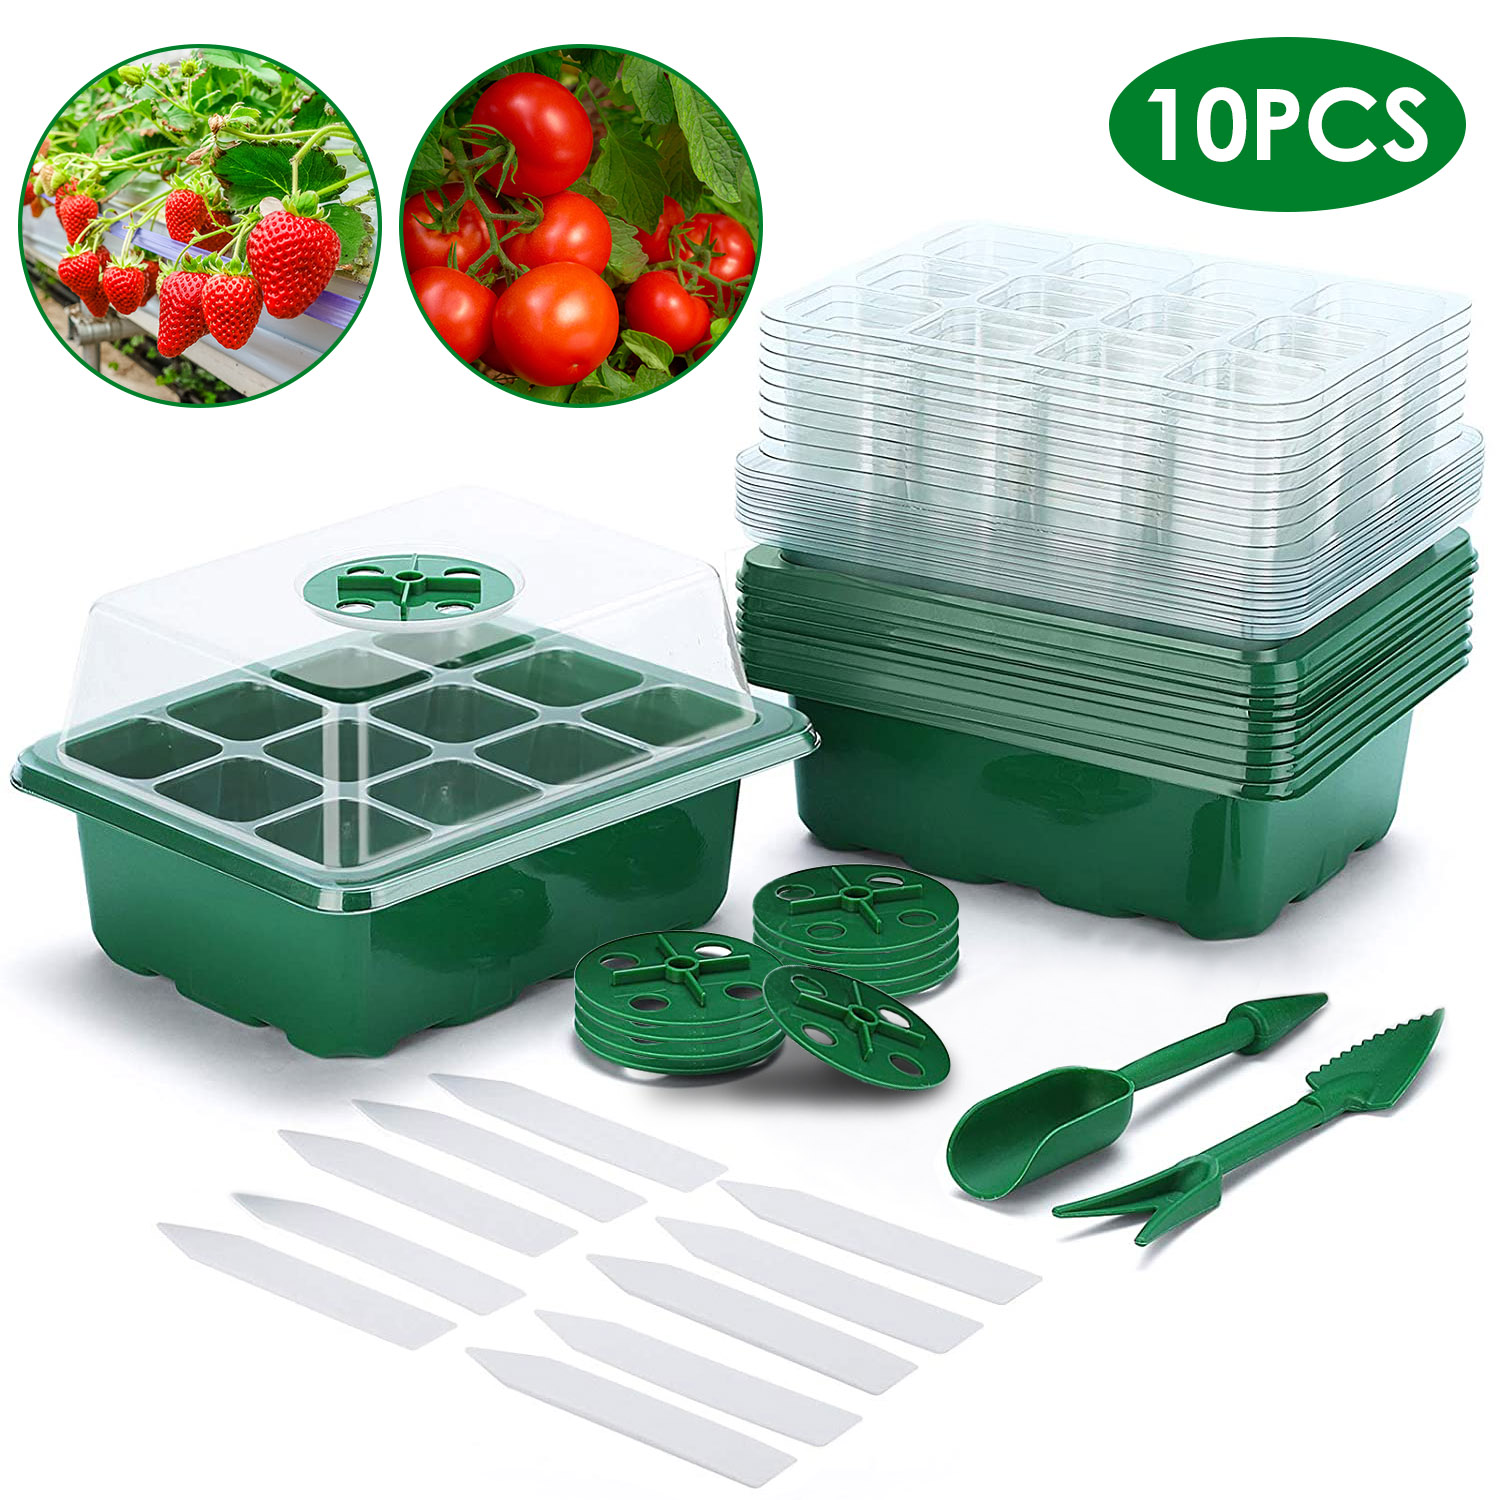 10Pcs Seed Starter Tray Kit Reusable Overall 120Cells Seeding Propagator Station Greenhouse Growing Germination Tray with Humidity Dome Label 2Pcs Gar